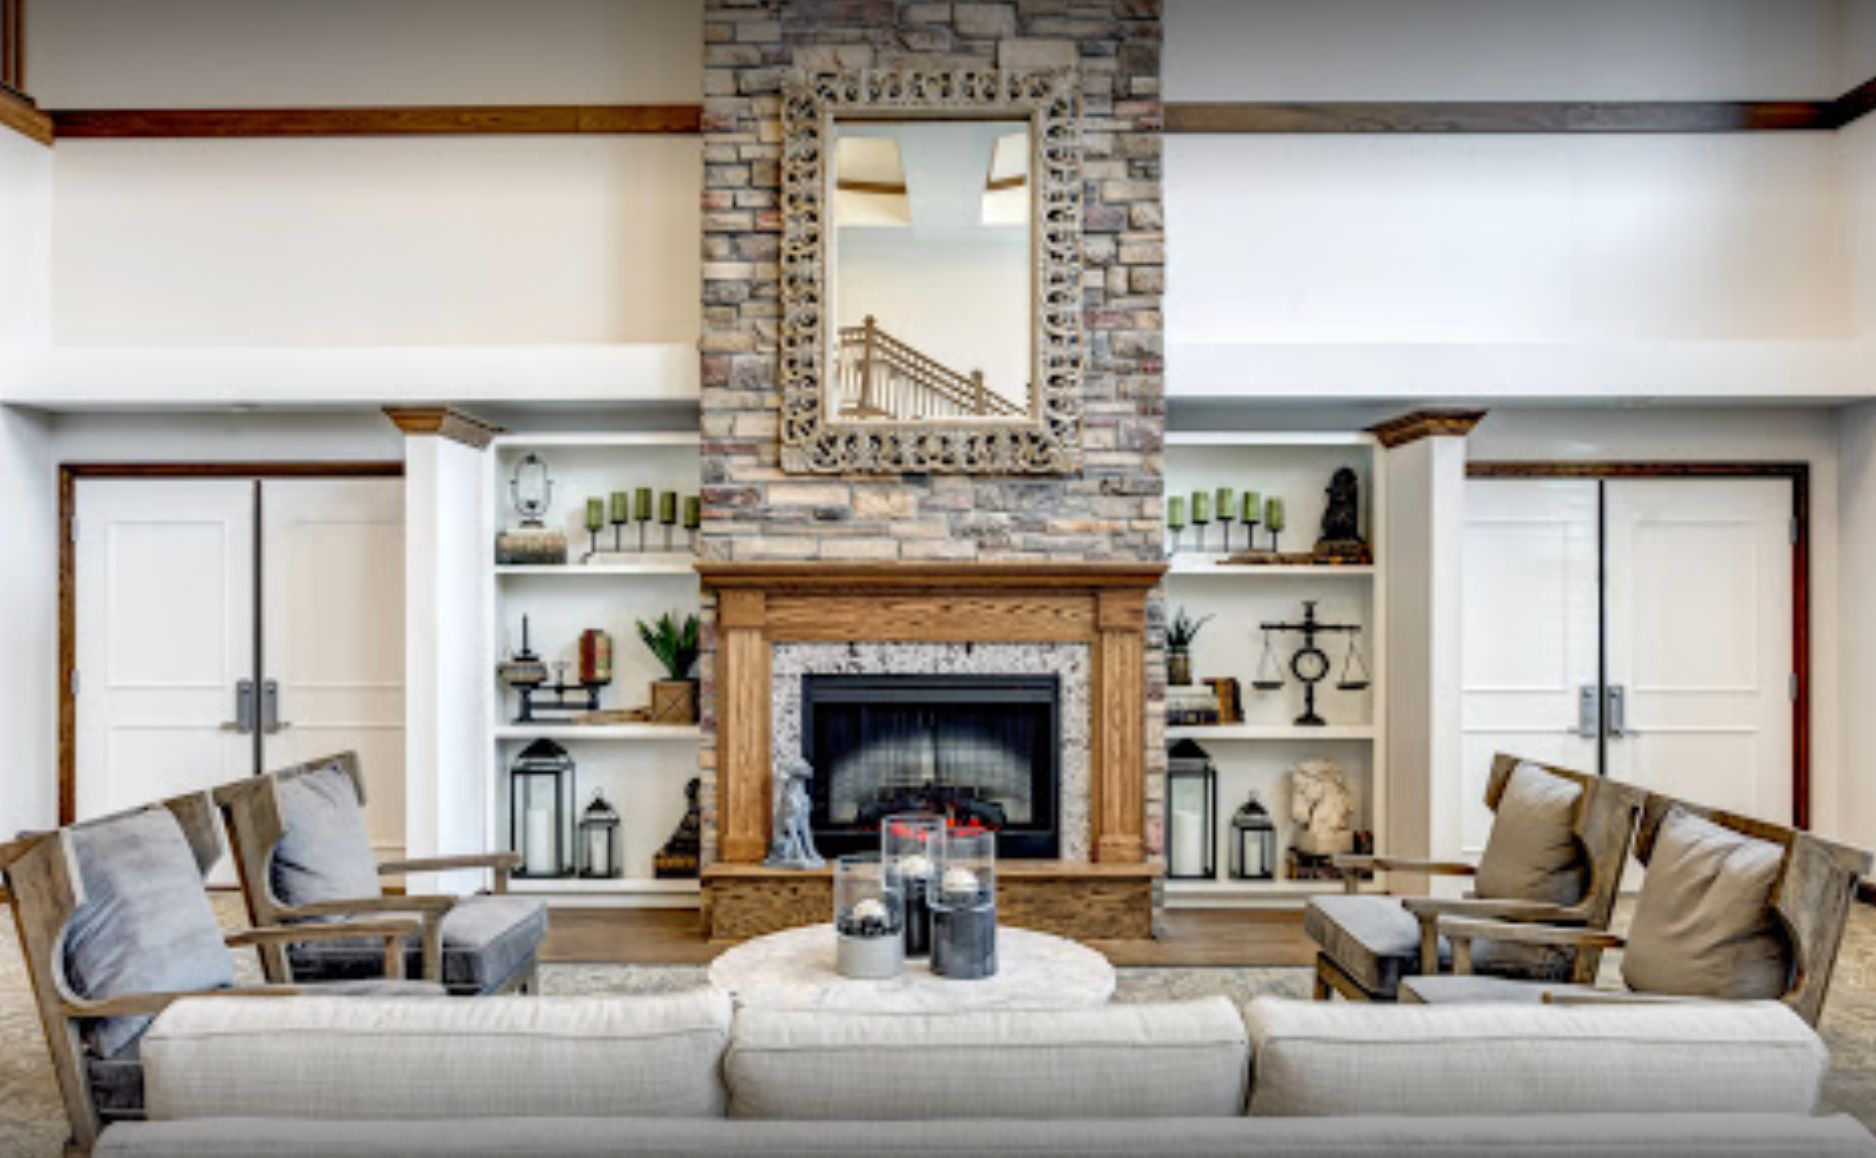 Interior view of Cedarhurst of Naperville senior living community featuring home decor, fireplace, and furniture.